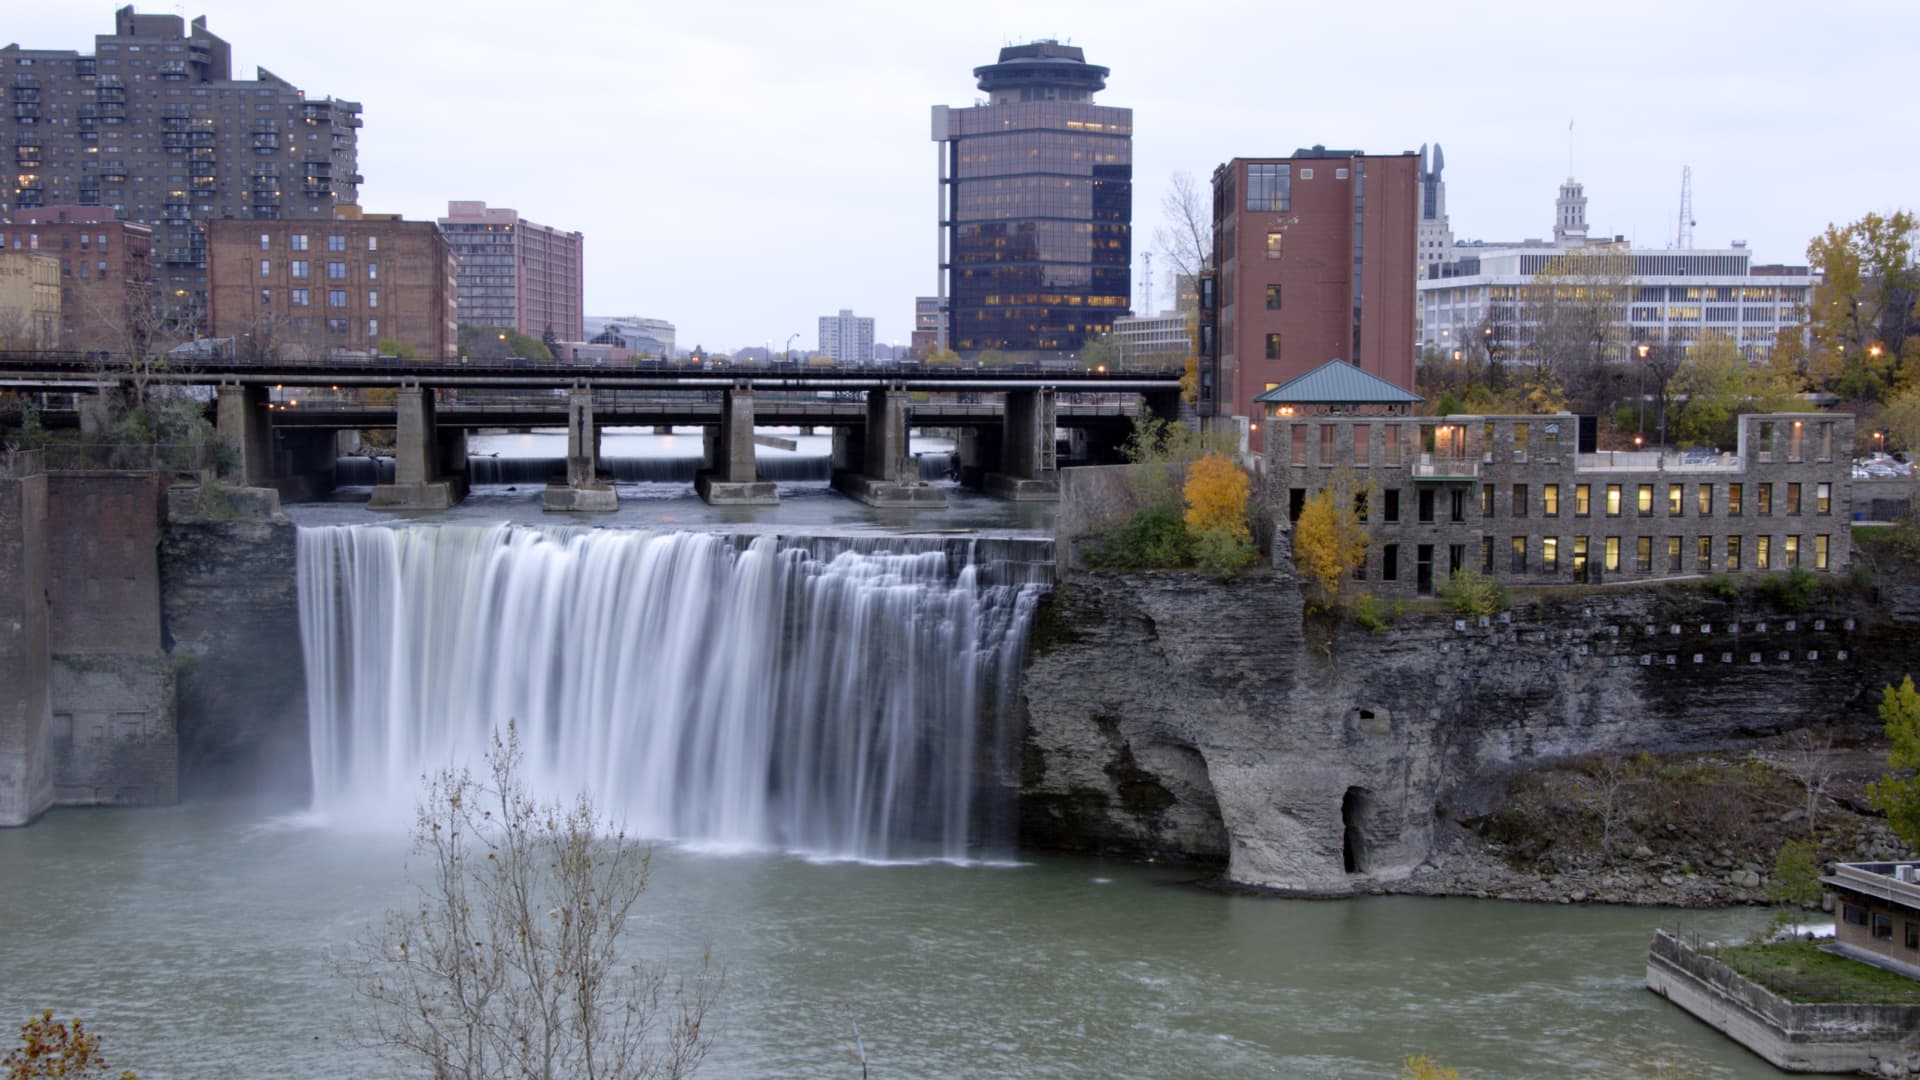 Rochester, New York has the second fastest-selling housing market, according to Creditnews Research.